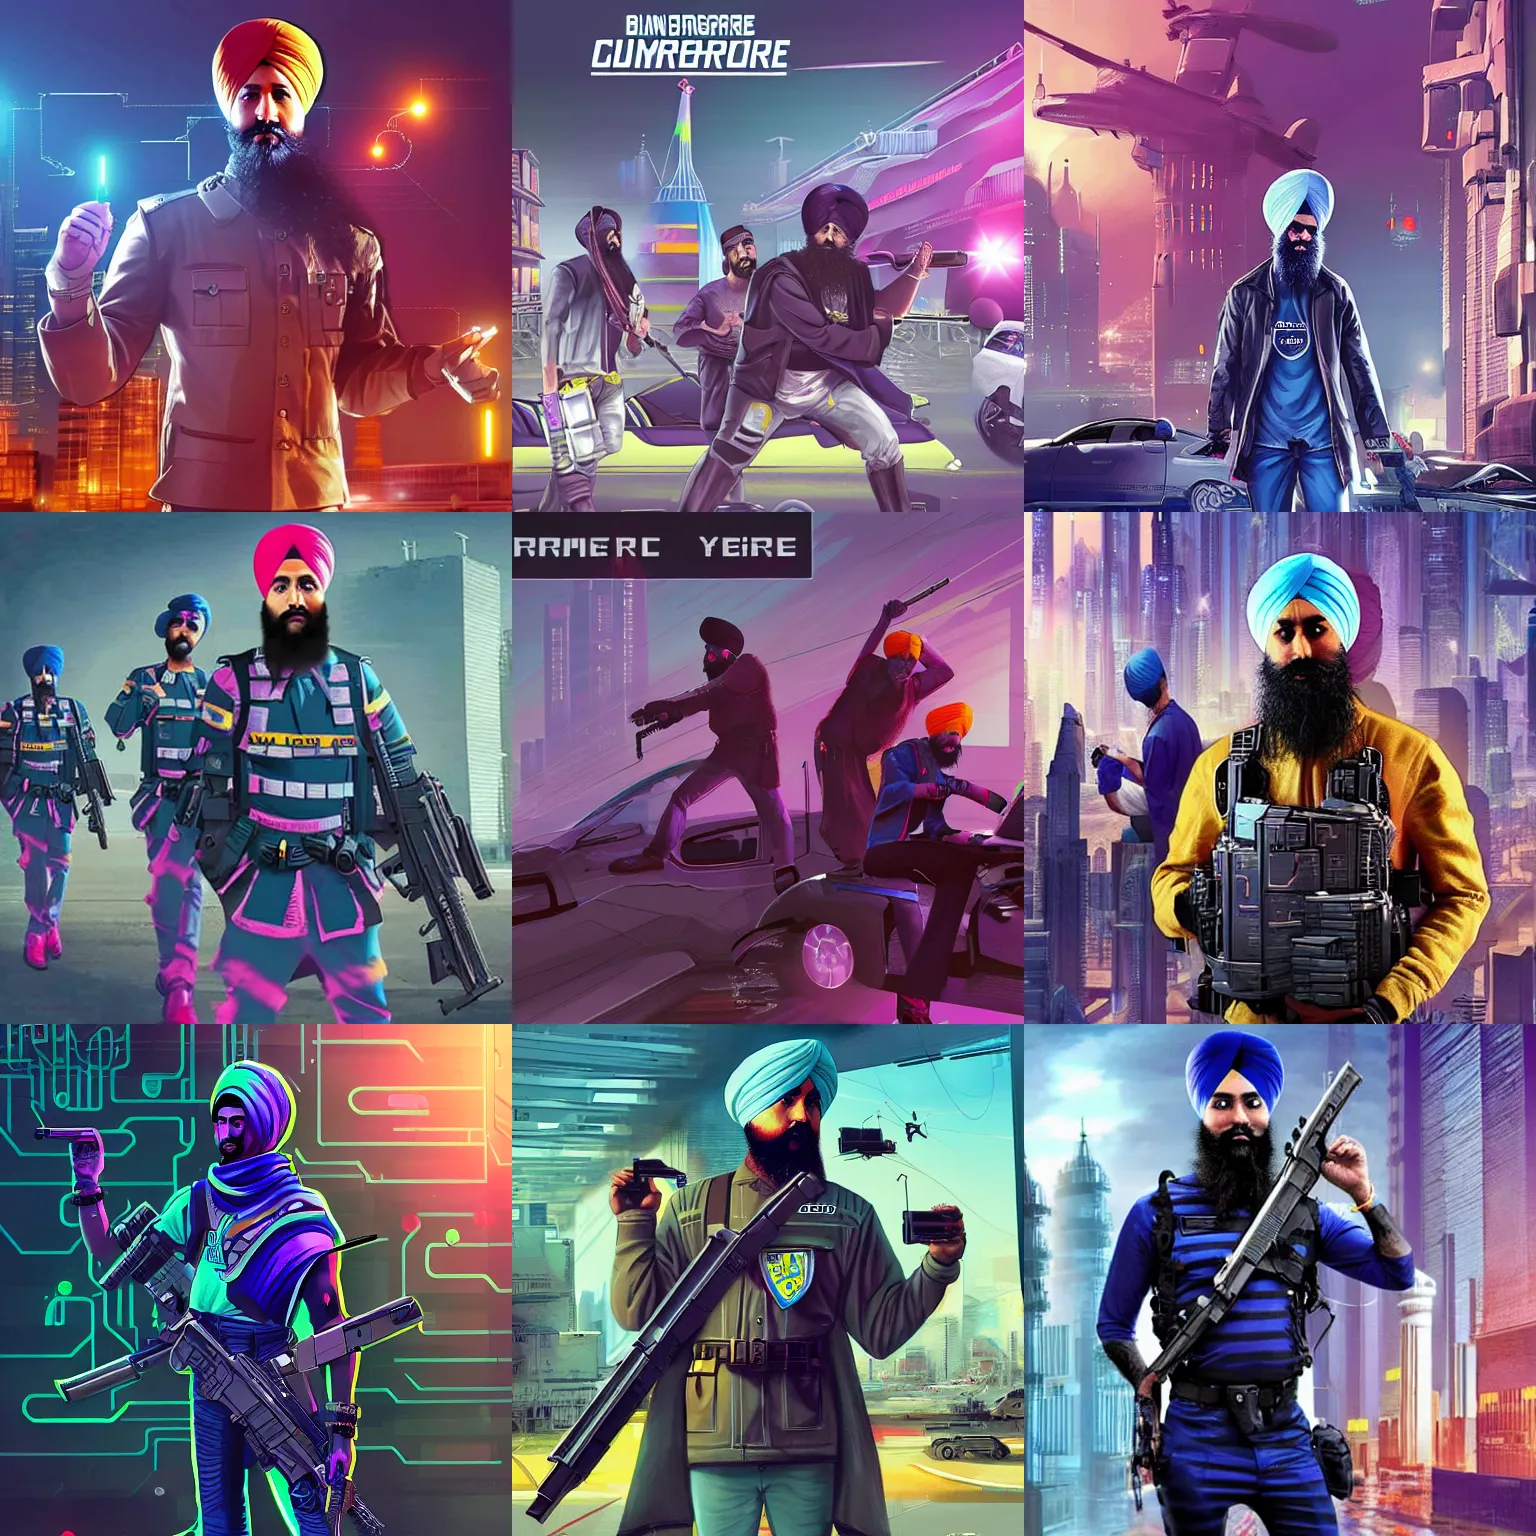 Prompt: sikh cyberempire, everyone is armed, flying cars and no crime, cyberpunk aesthetic